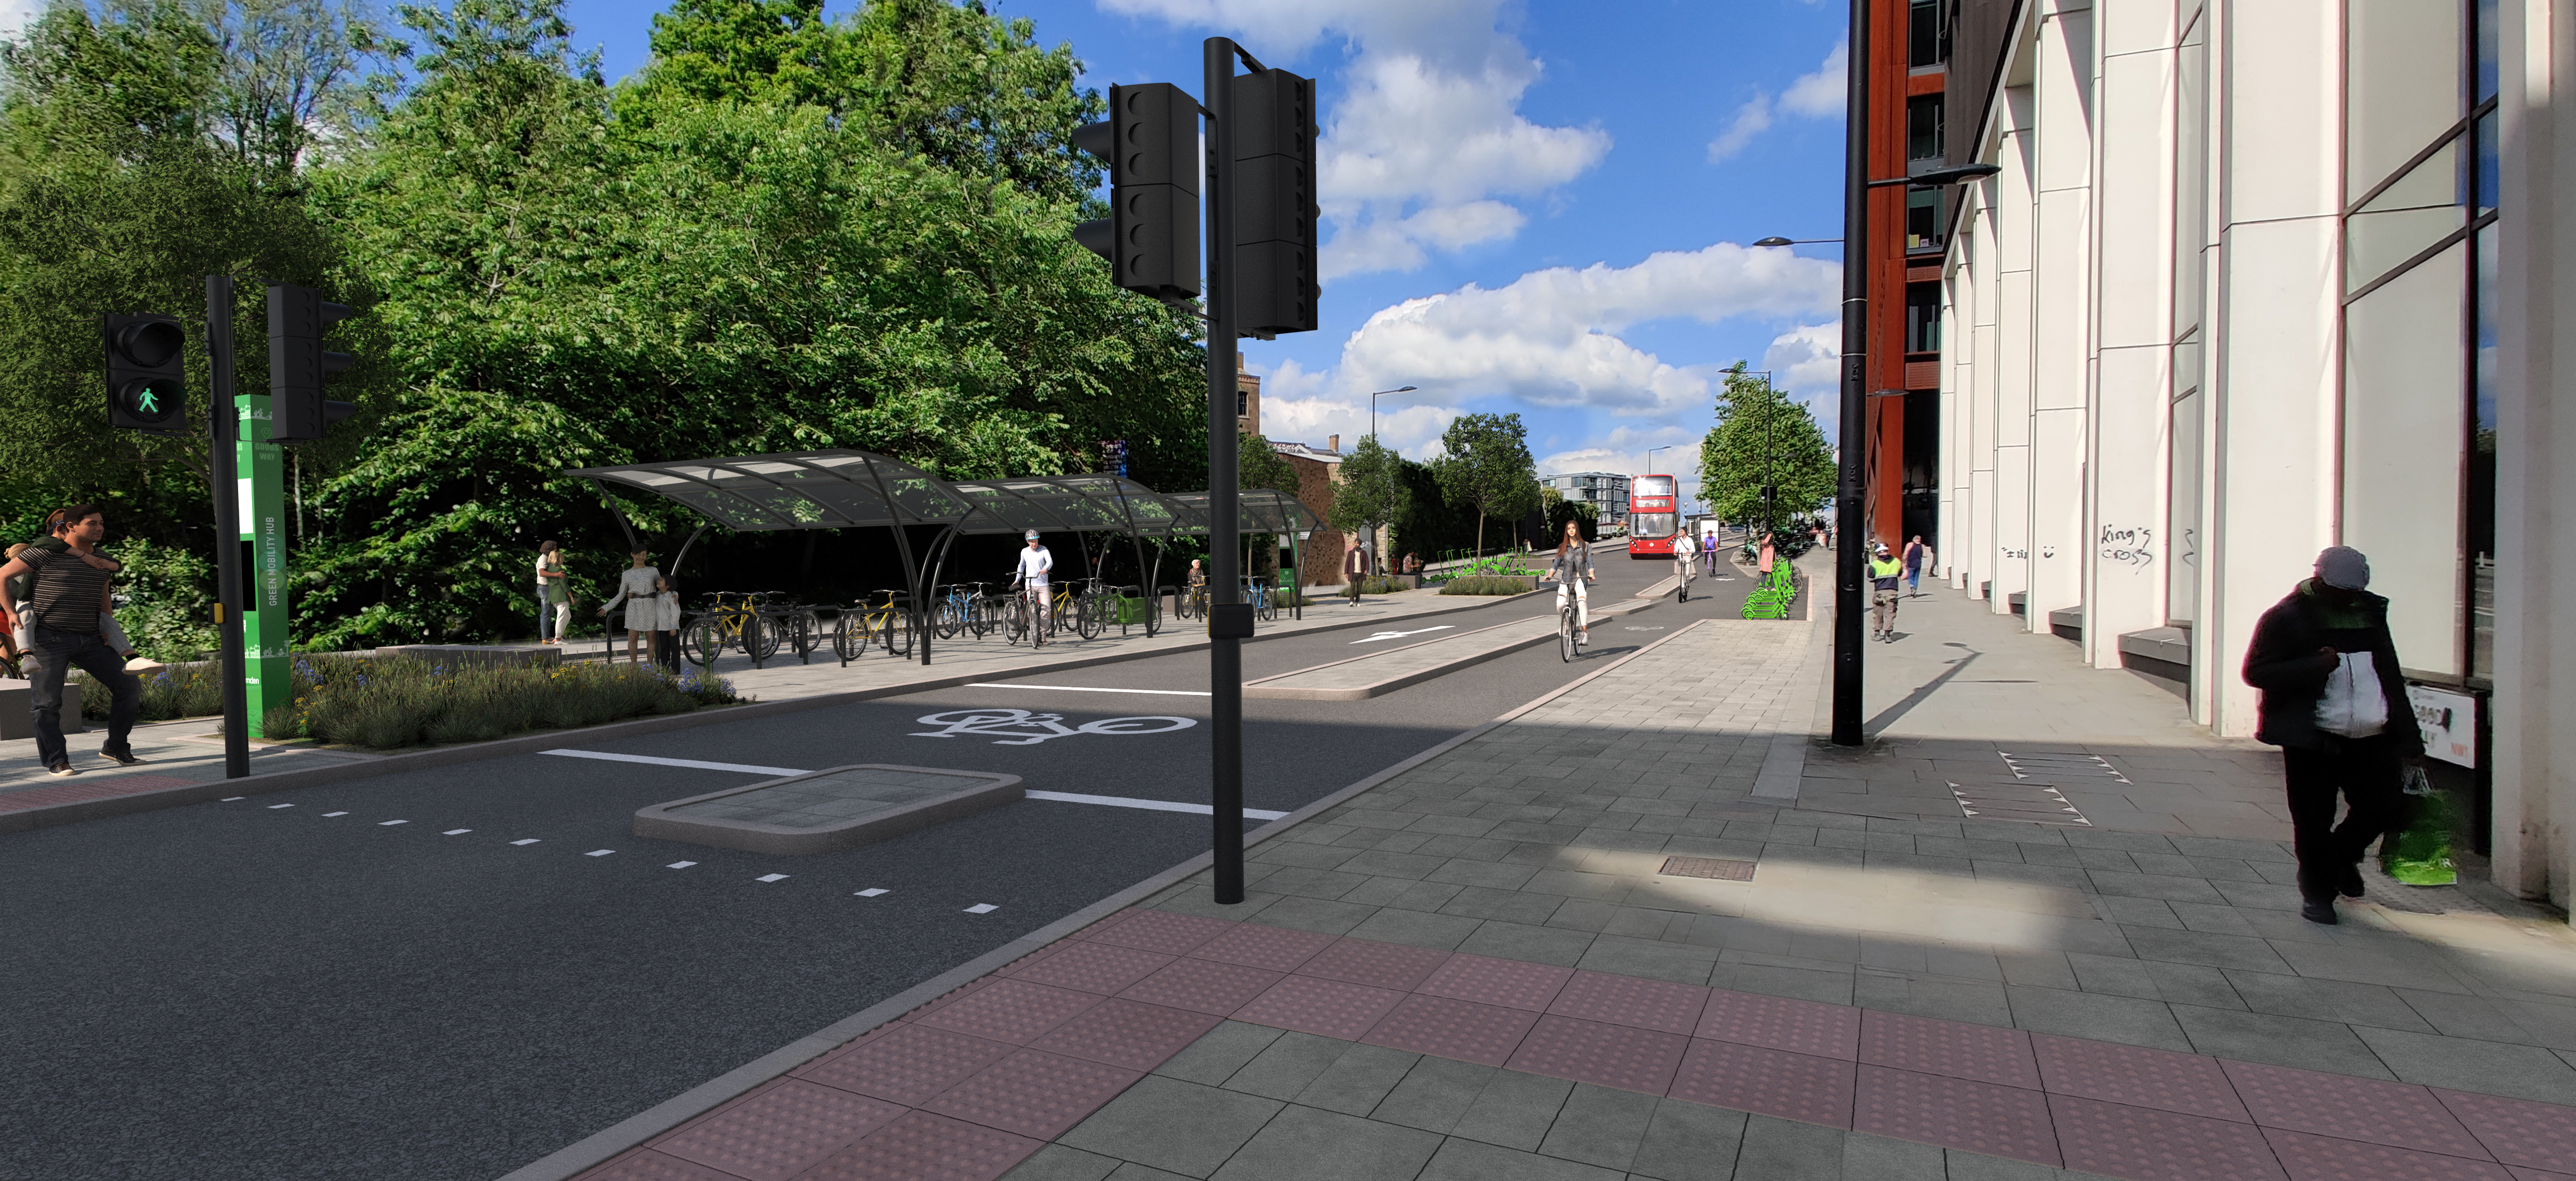 visulisation of a pedestrian crossing at Goods Way with cycle parking